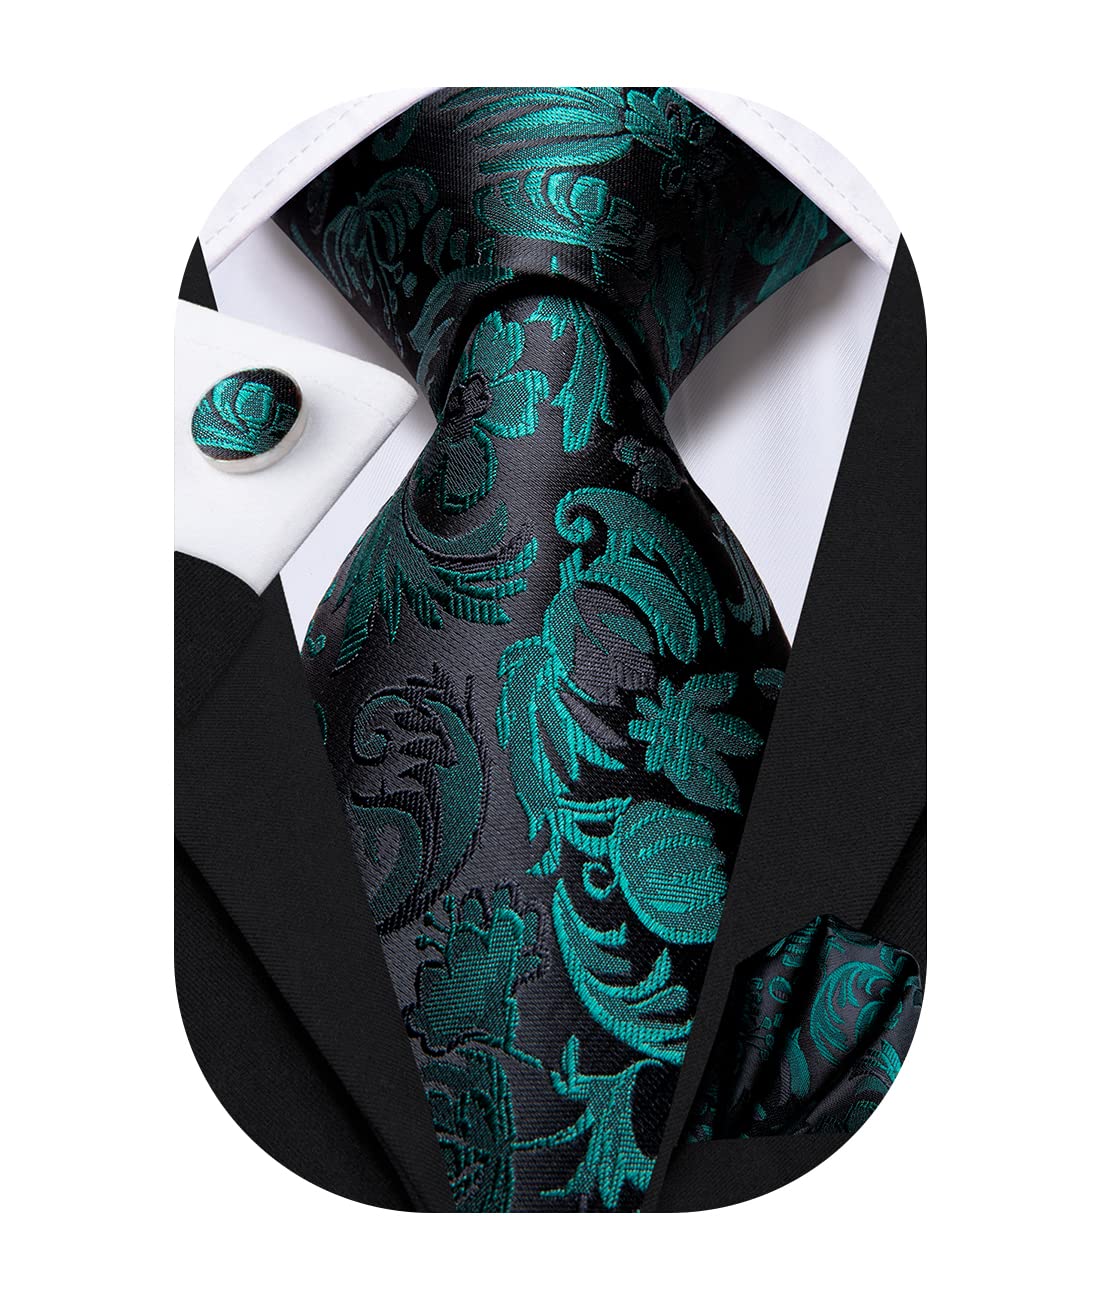 Hi-Tie Black And Green Floral Mens Necktie Set Silk Woven Party Tie And Pocket Square Cufflinks